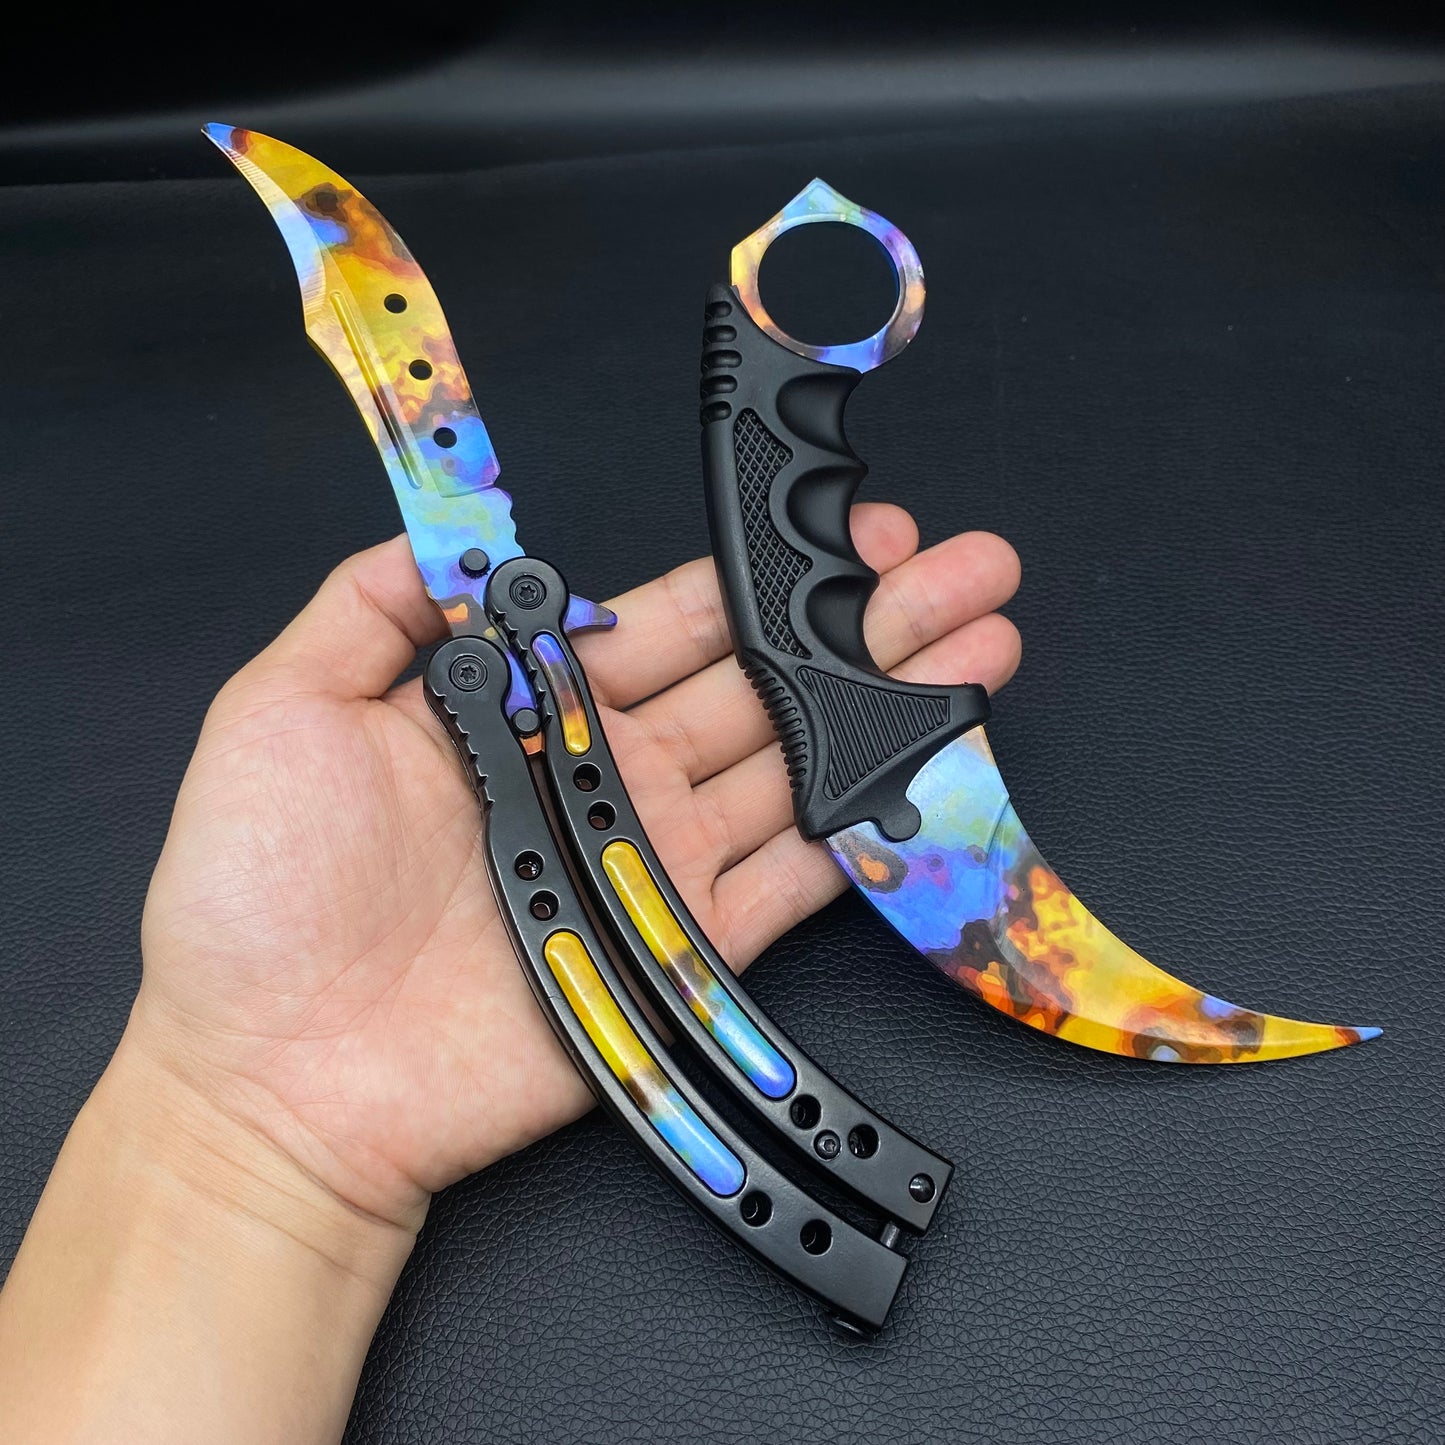 Case Hardened Blunt Blade Karambit Trainer & Balisong Butterfly Knife Trainer 2 in 1 Pack Gift Box